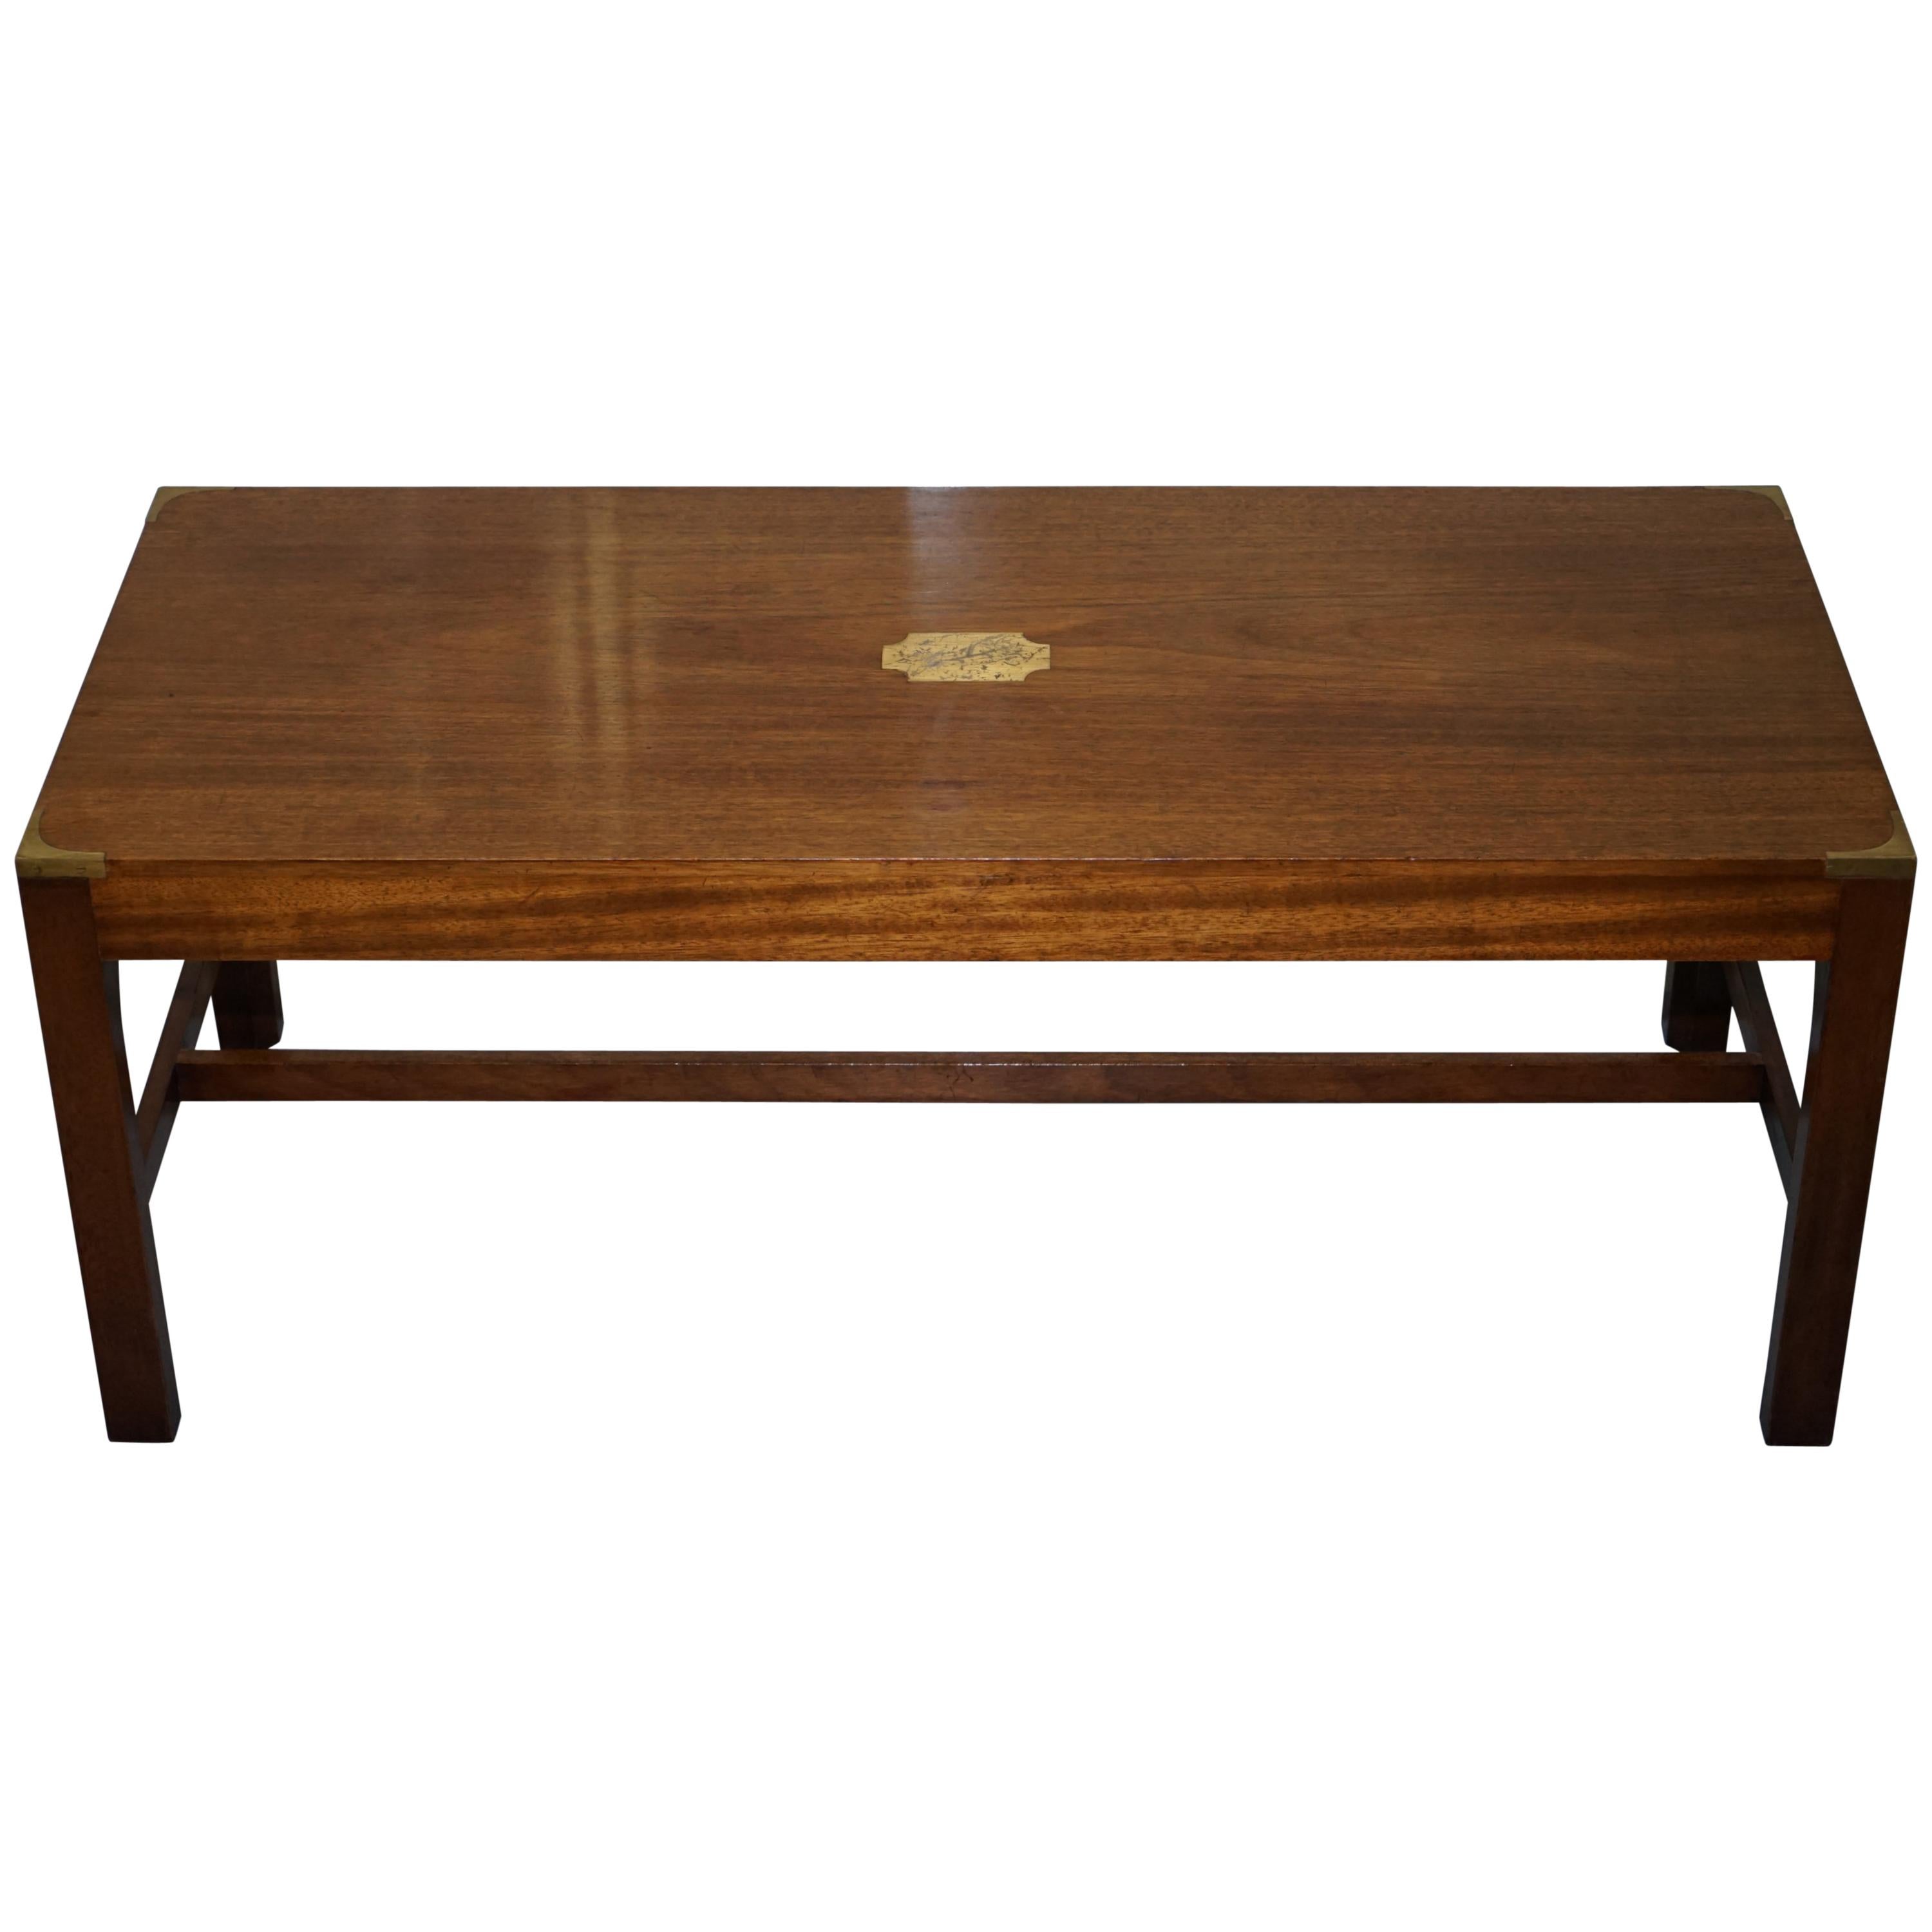 Harrods London Mahogany Kennedy Furniture Military Campaign Coffee Table